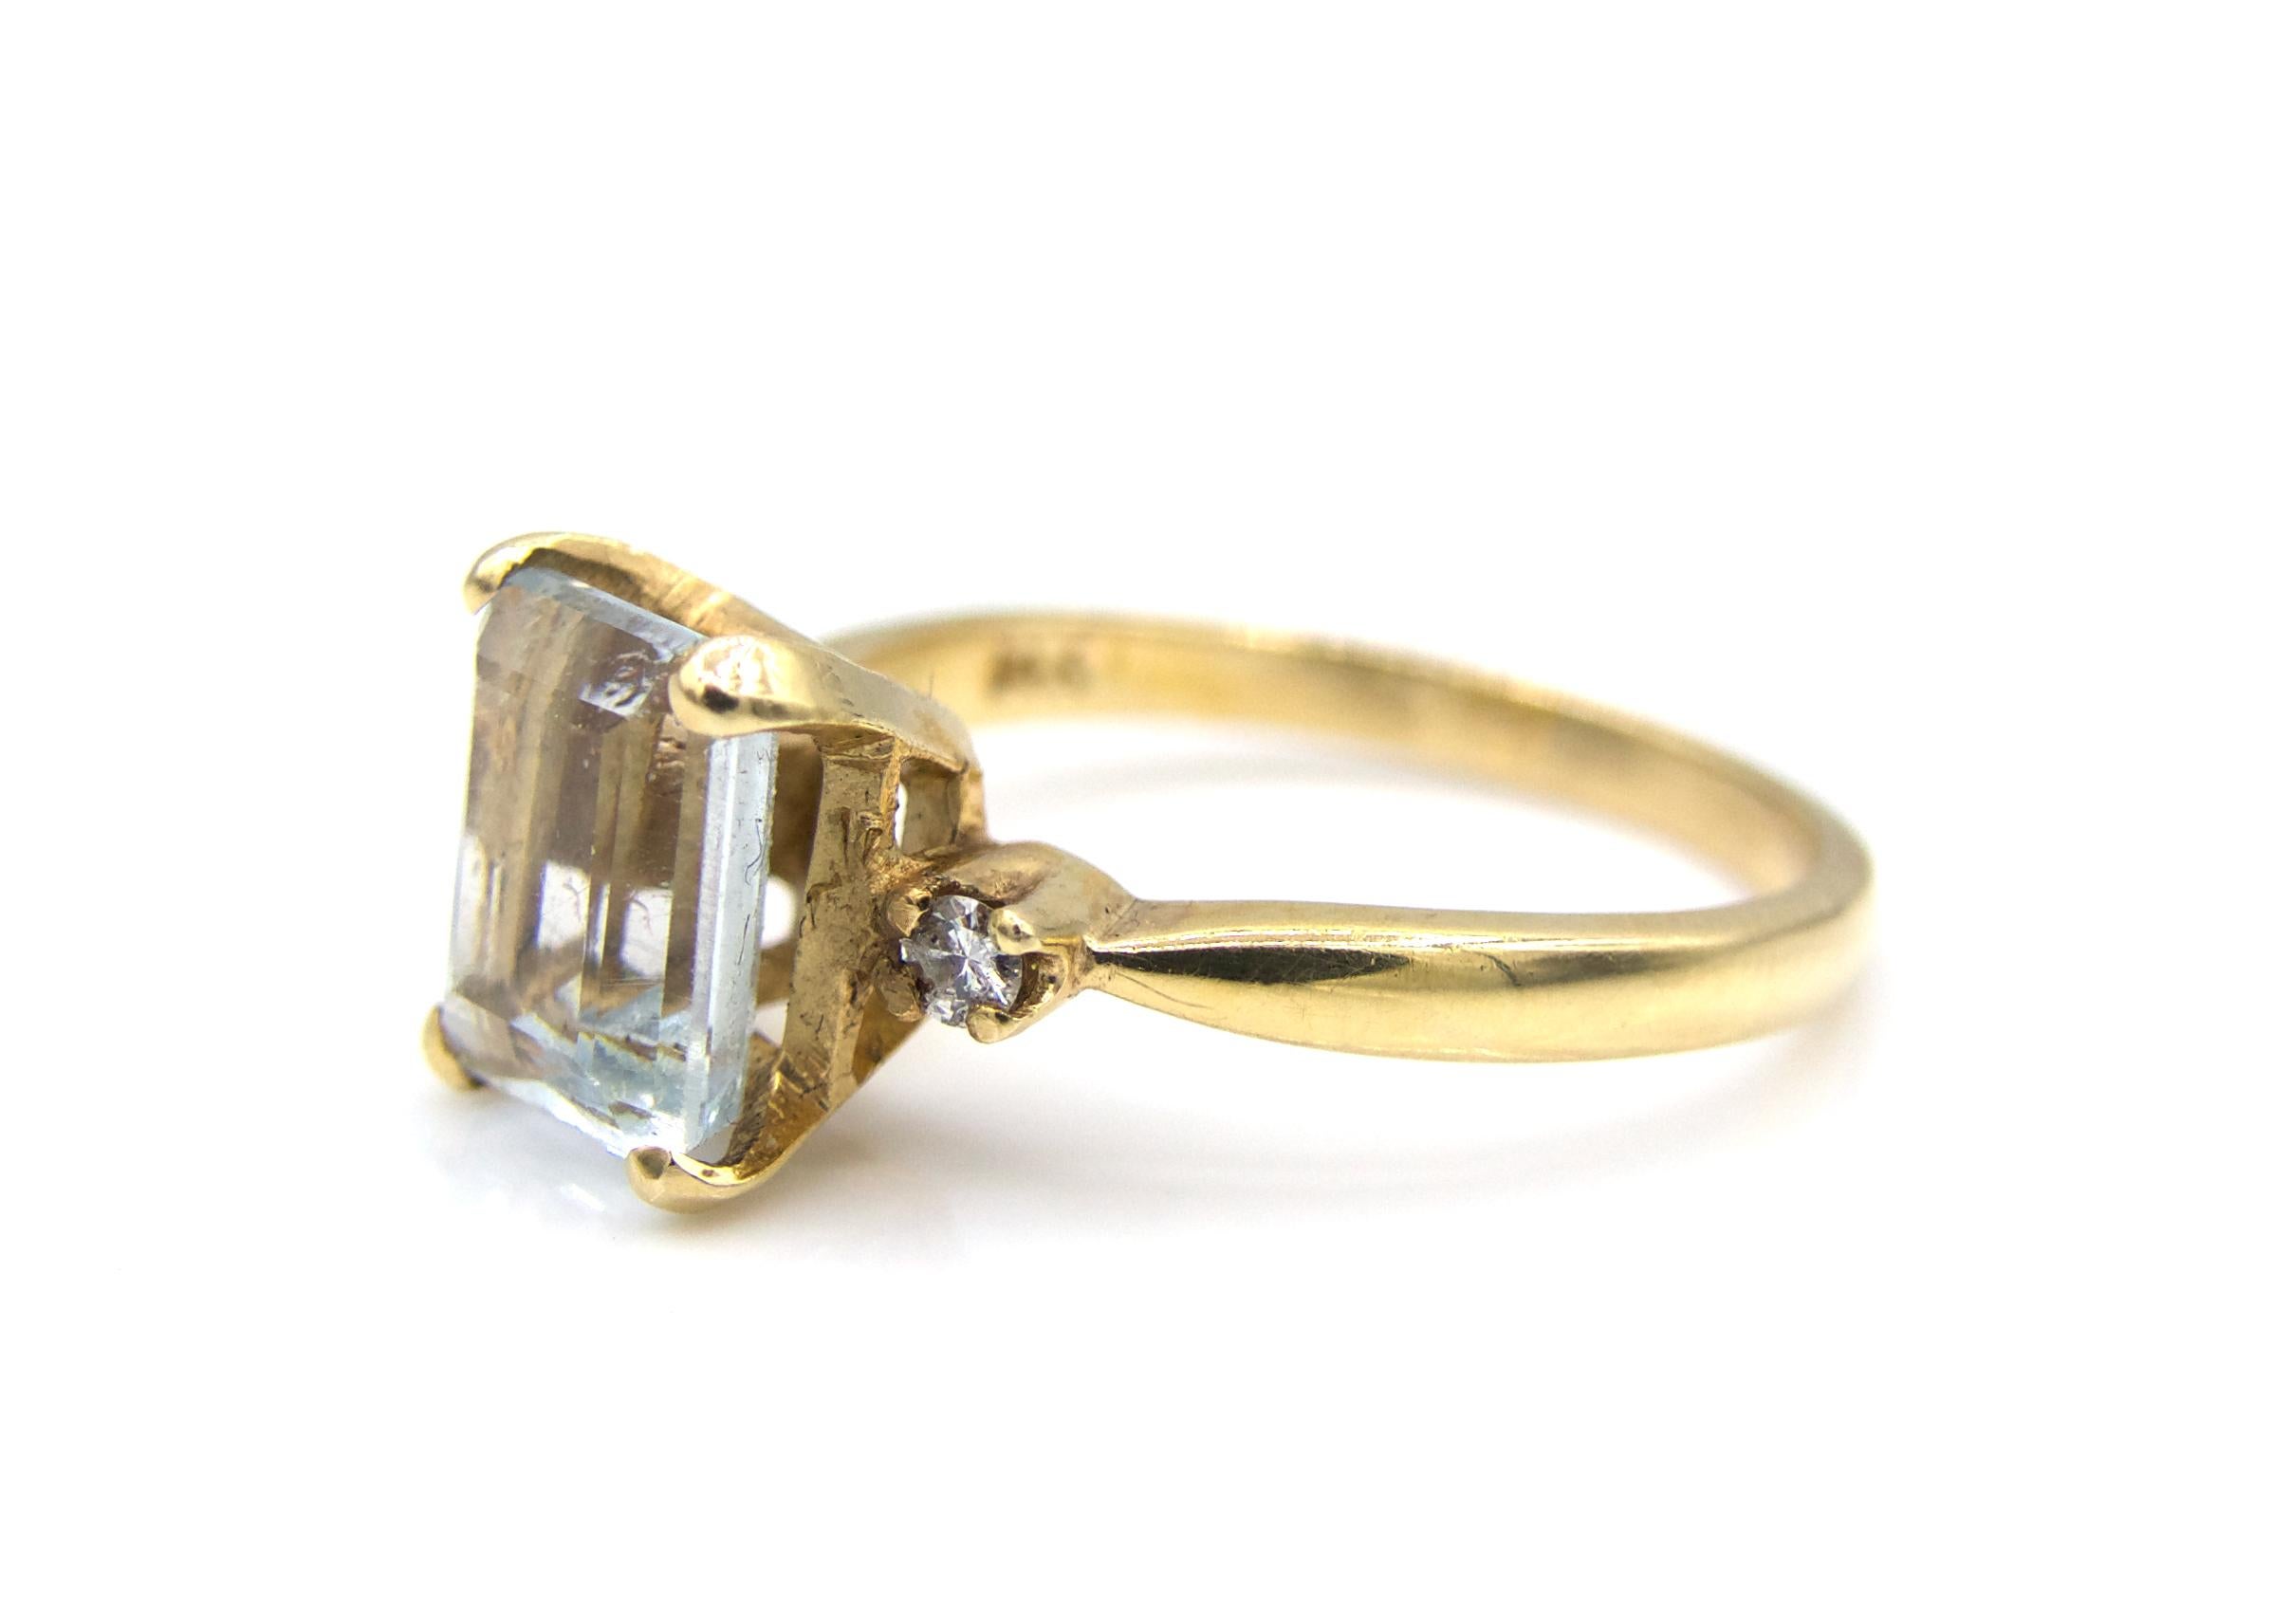 This classic and beautiful 14K Yellow Gold ring flaunts a 3 Carat Emerald Cut Aquamarine center stone with round cut diamonds on each of its sides. 

3.4 grams 

Size 6.25

Sizable